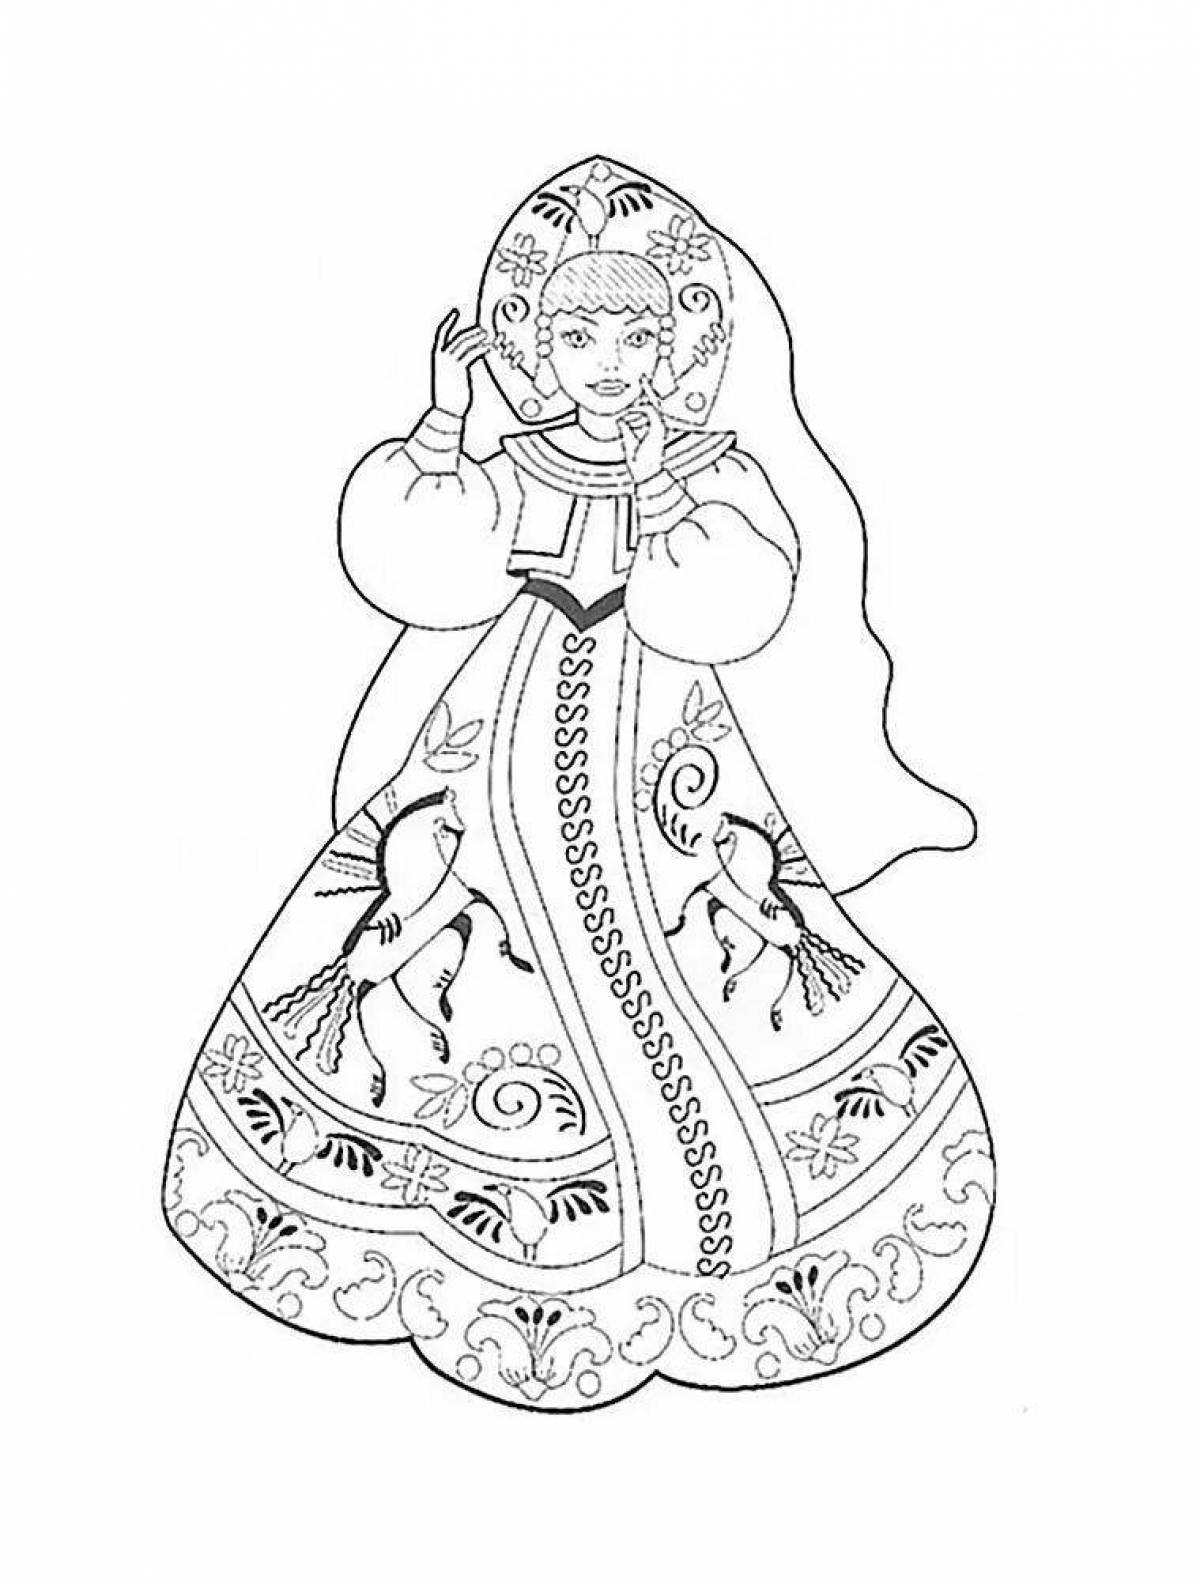 Coloring page elegant Russian folk costume